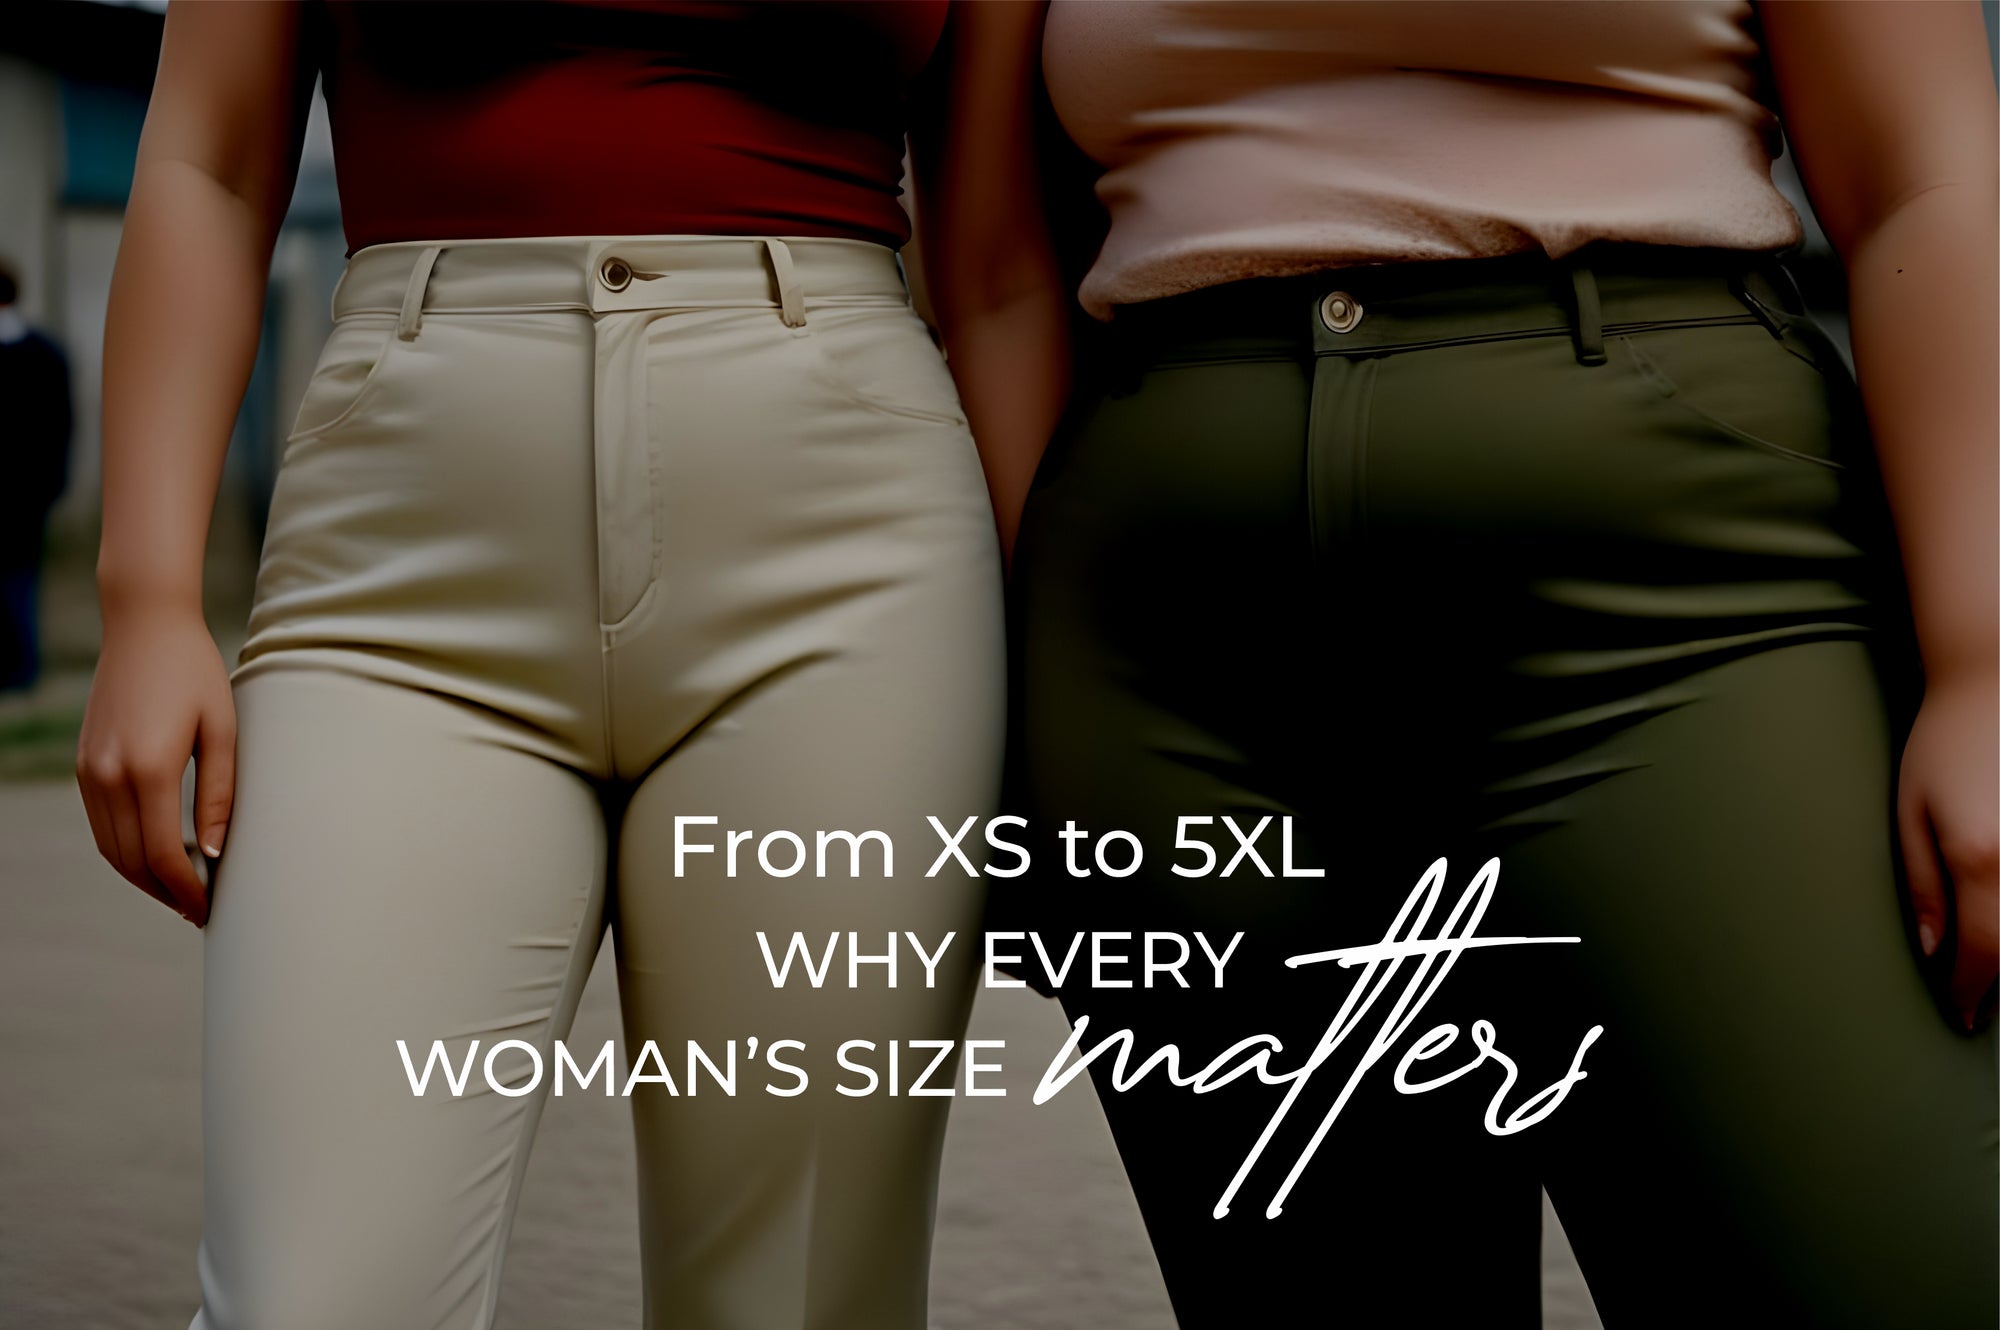 From XS to 5XL: Why Every Woman's Size Matters